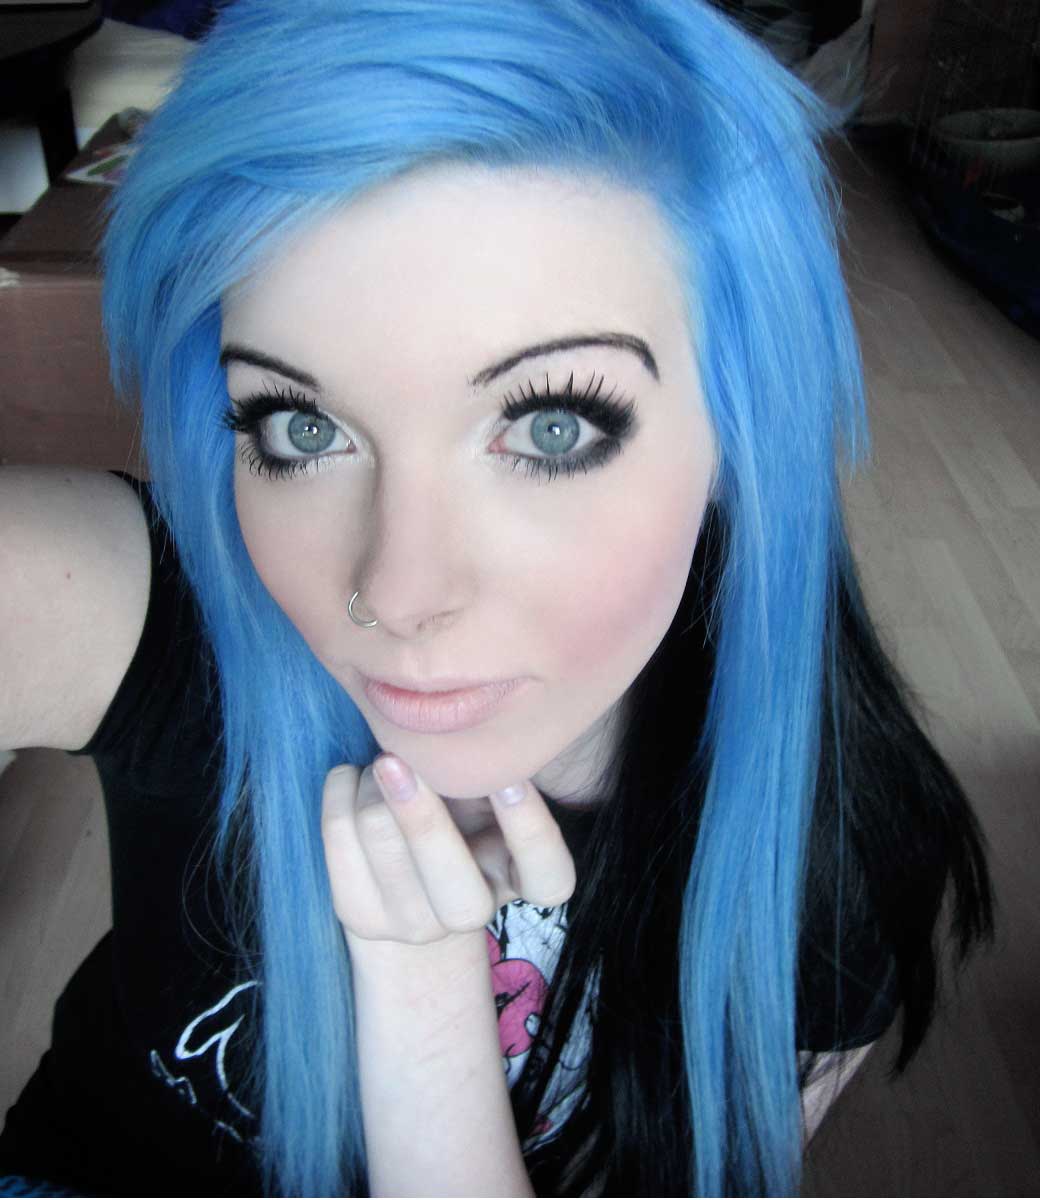 Emo Girl with Black Hair and Blue